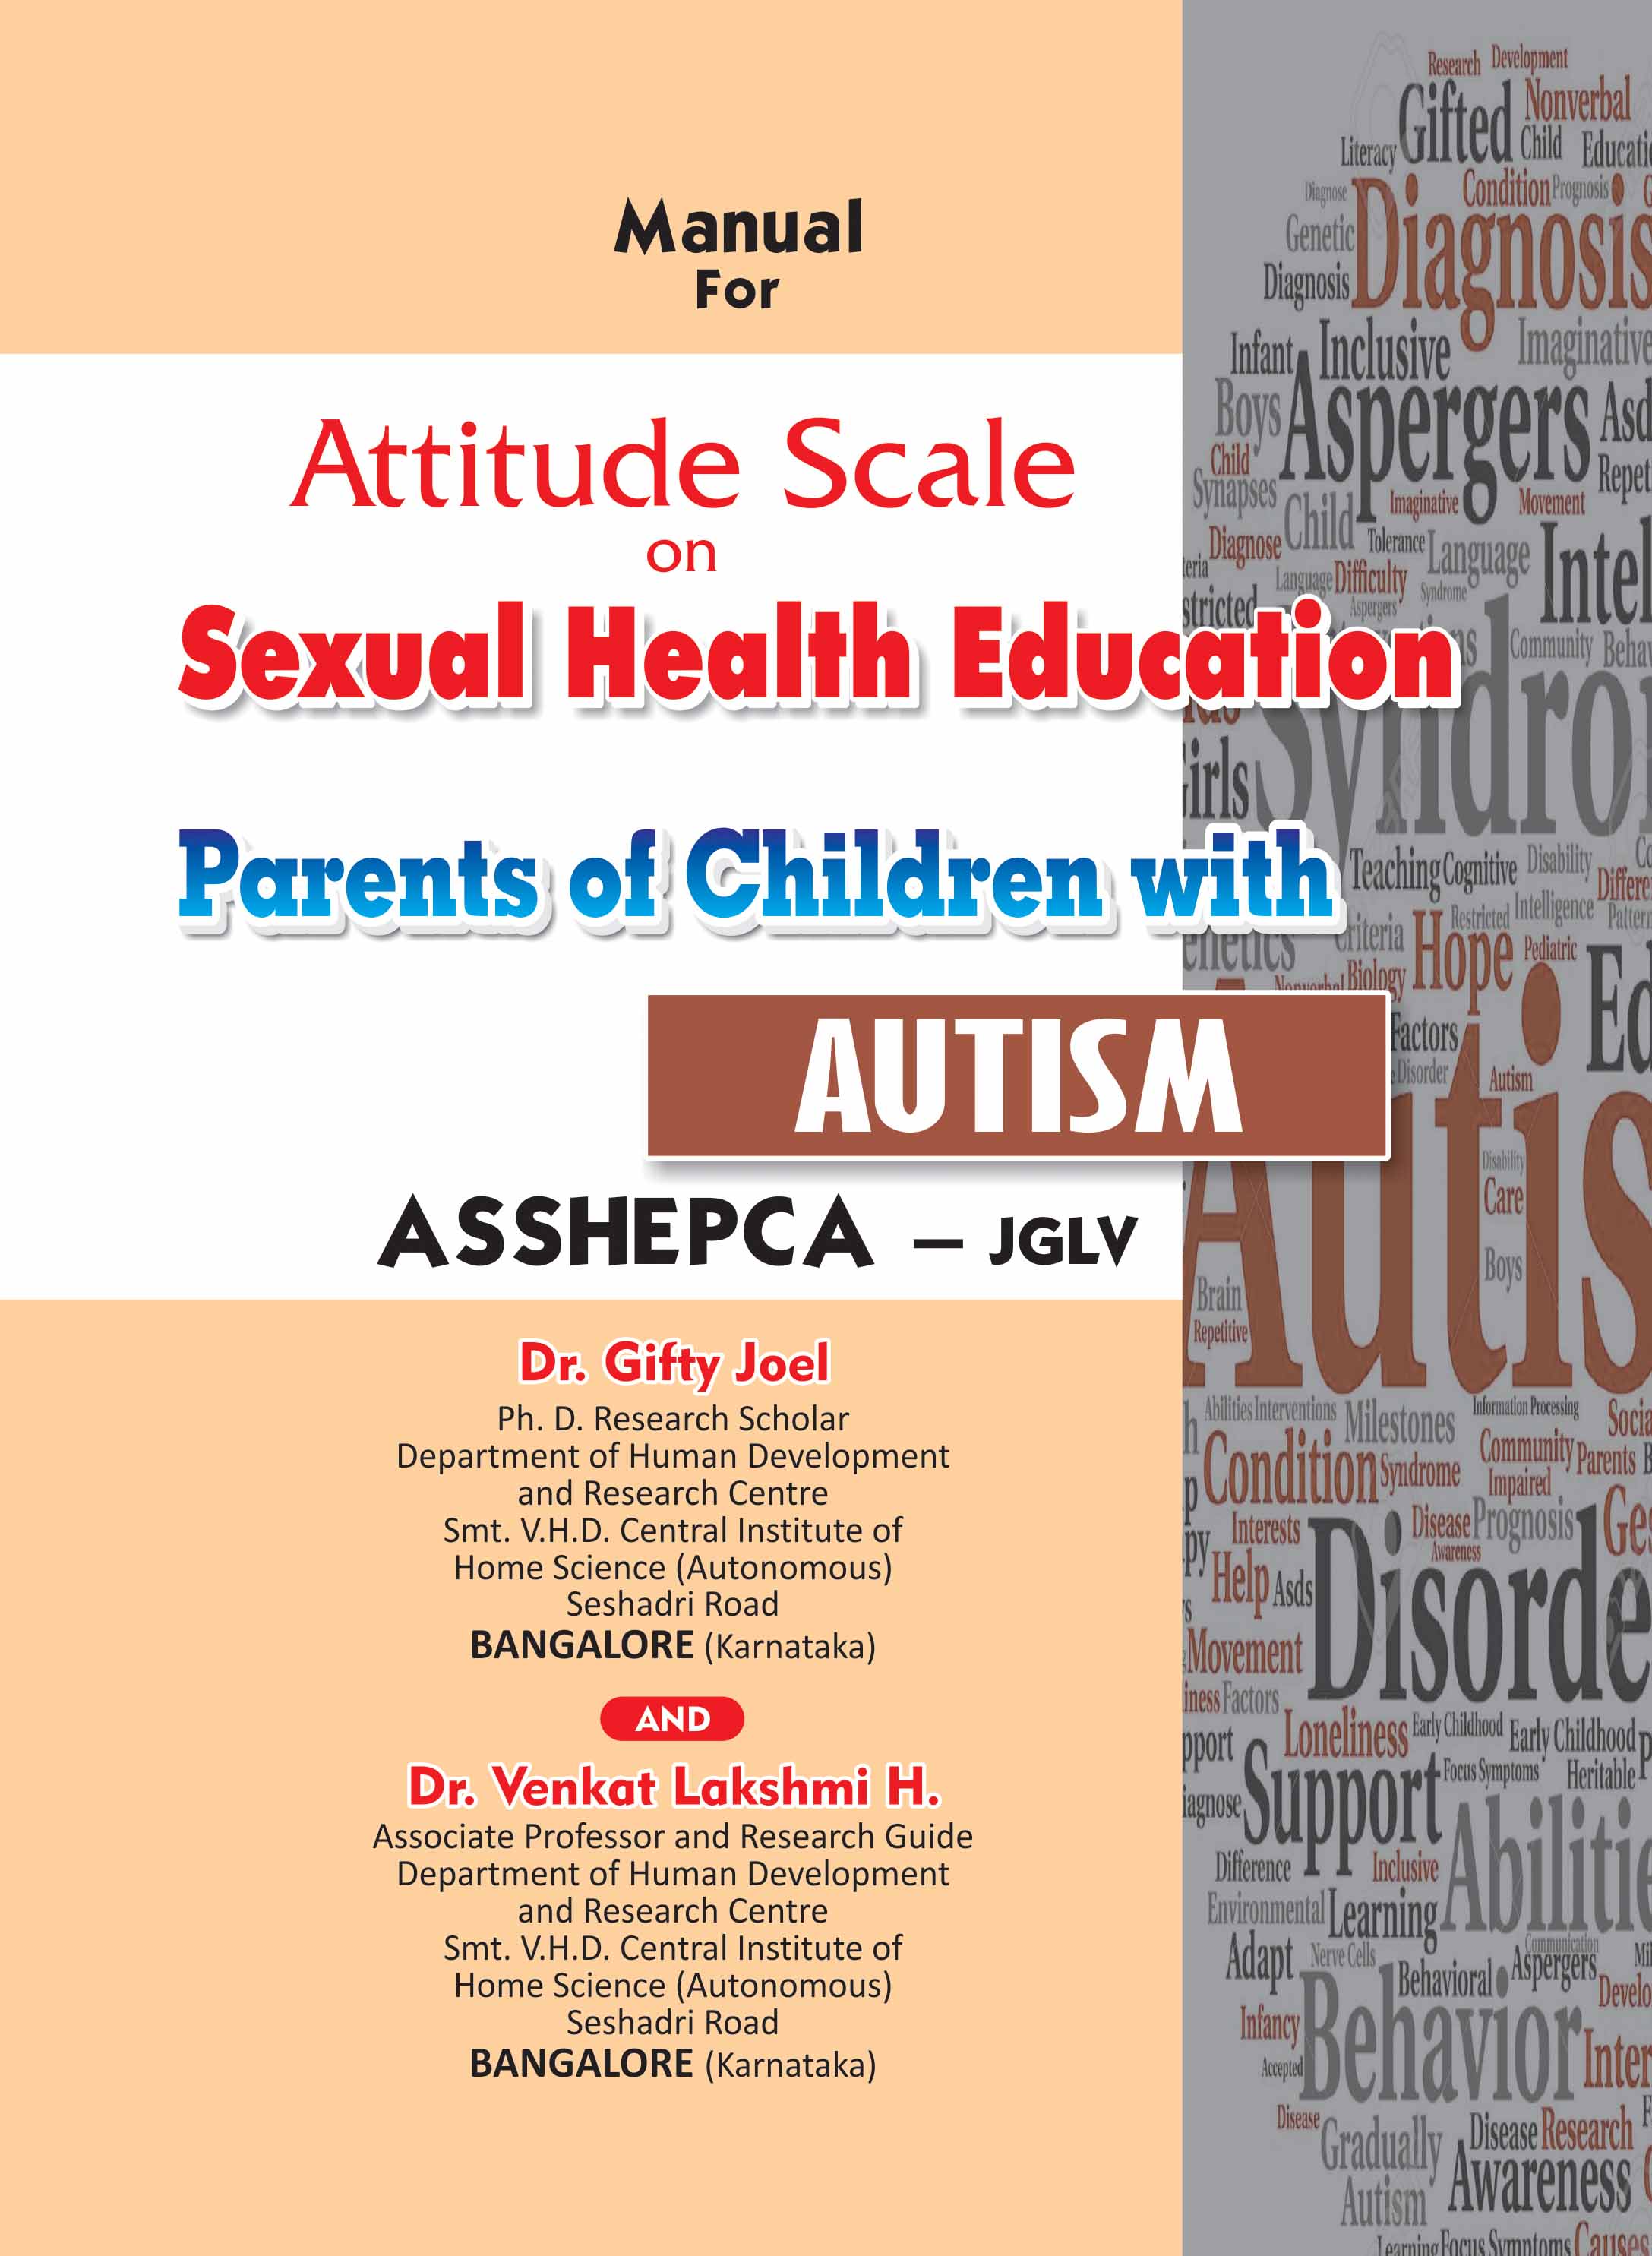 ATTITUDE-SCALE-FOR-SEXUAL-HEALTH-EDUCATION-PARENTS-OF-CHILDREN-WITH-AUTISM